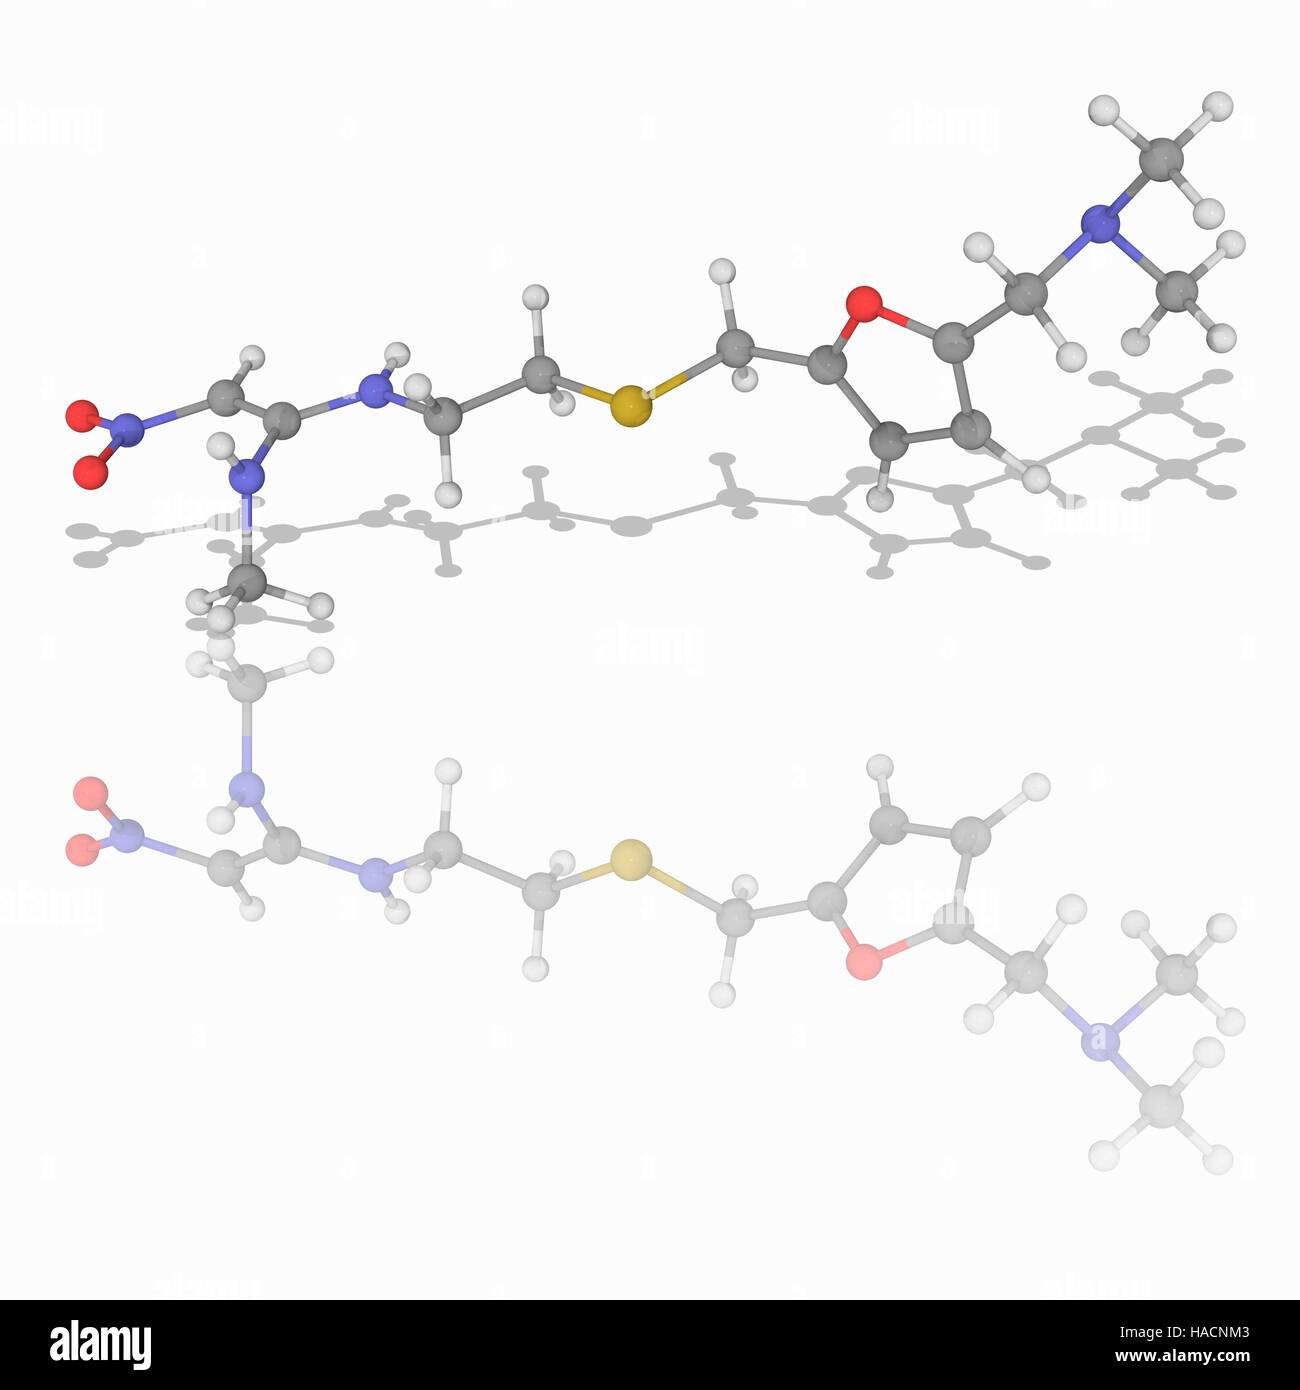 Ranitidine. Molecular model of the drug ranitidine (C13.H22.N4.O3.S), a histamine H2-receptor antagonist that inhibits stomach acid production and is used to treat peptic ulcer disease and gastroesophageal reflux disease (GERD). It is marketed as Zantac. Atoms are represented as spheres and are colour-coded: carbon (grey), hydrogen (white), nitrogen (blue), oxygen (red) and sulphur (yellow). Illustration. Stock Photo